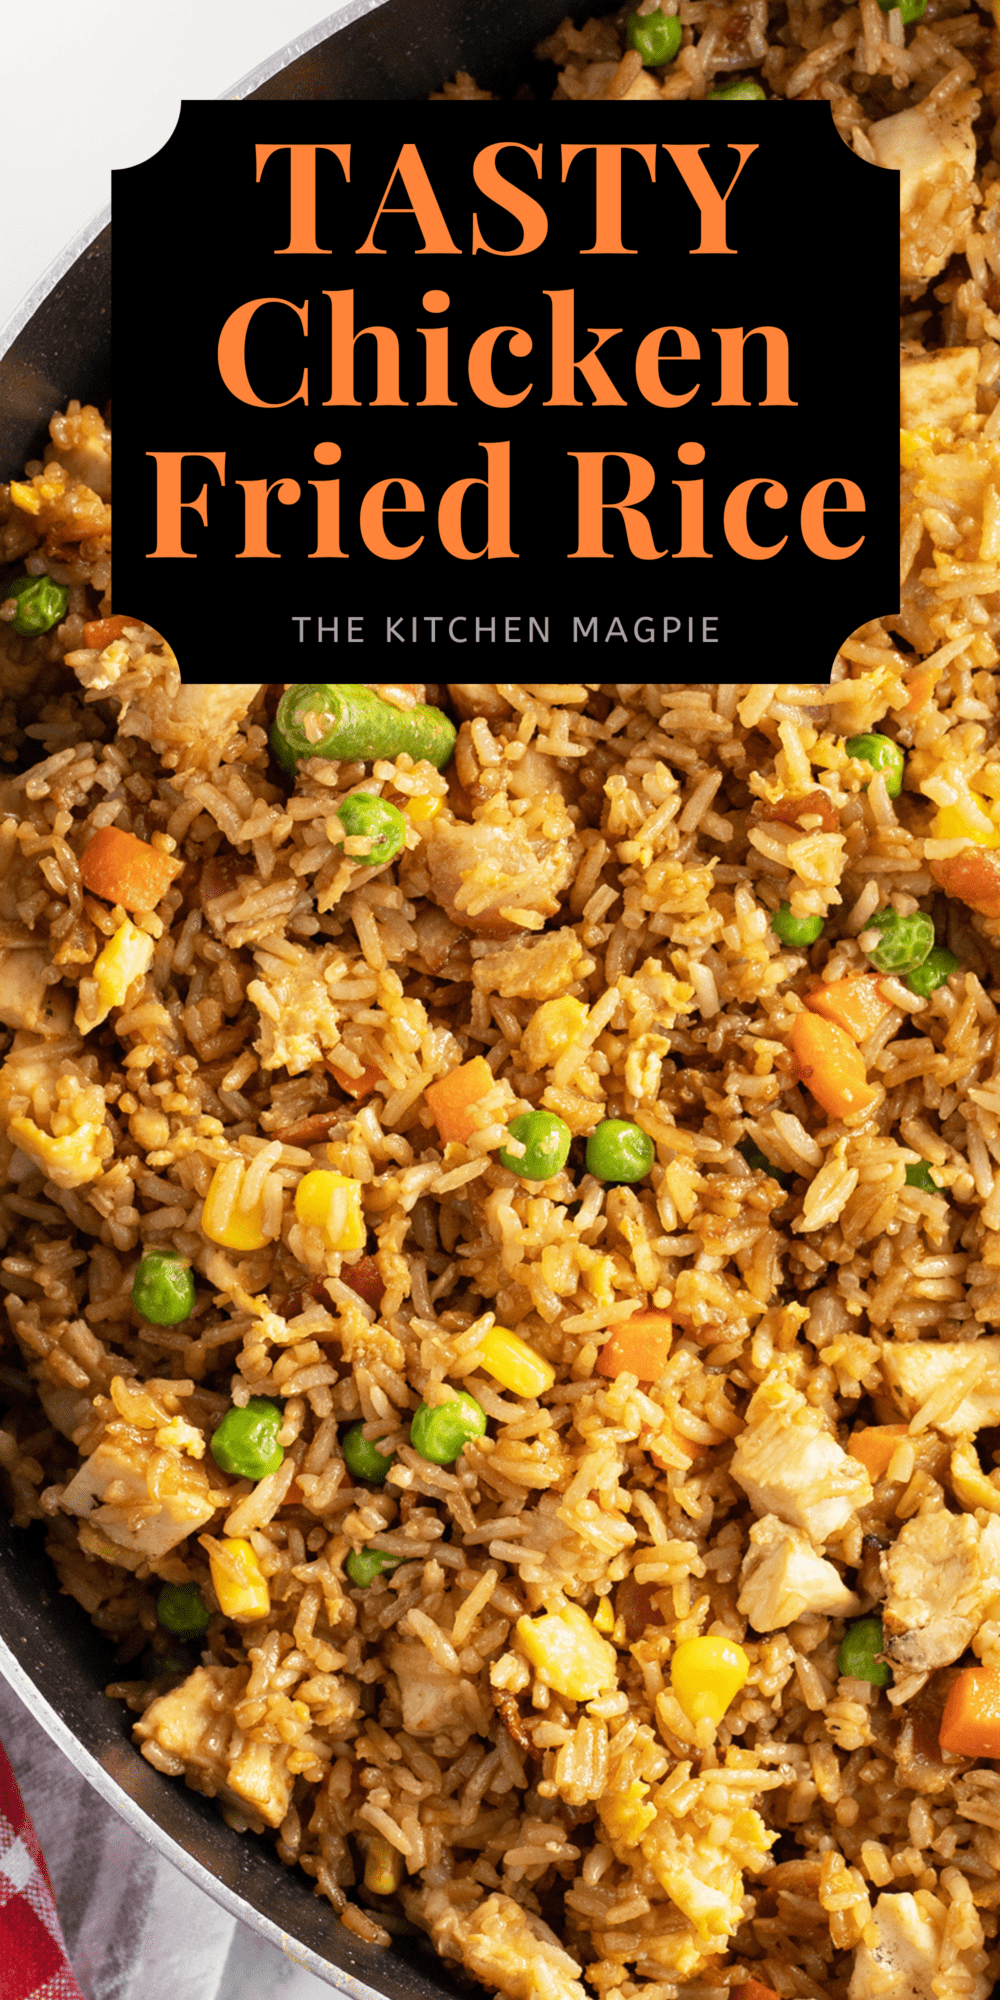  If you have some leftover chicken and rice from a different meal, you can make this Chicken Fried Rice whenever you like in barely any time at all!